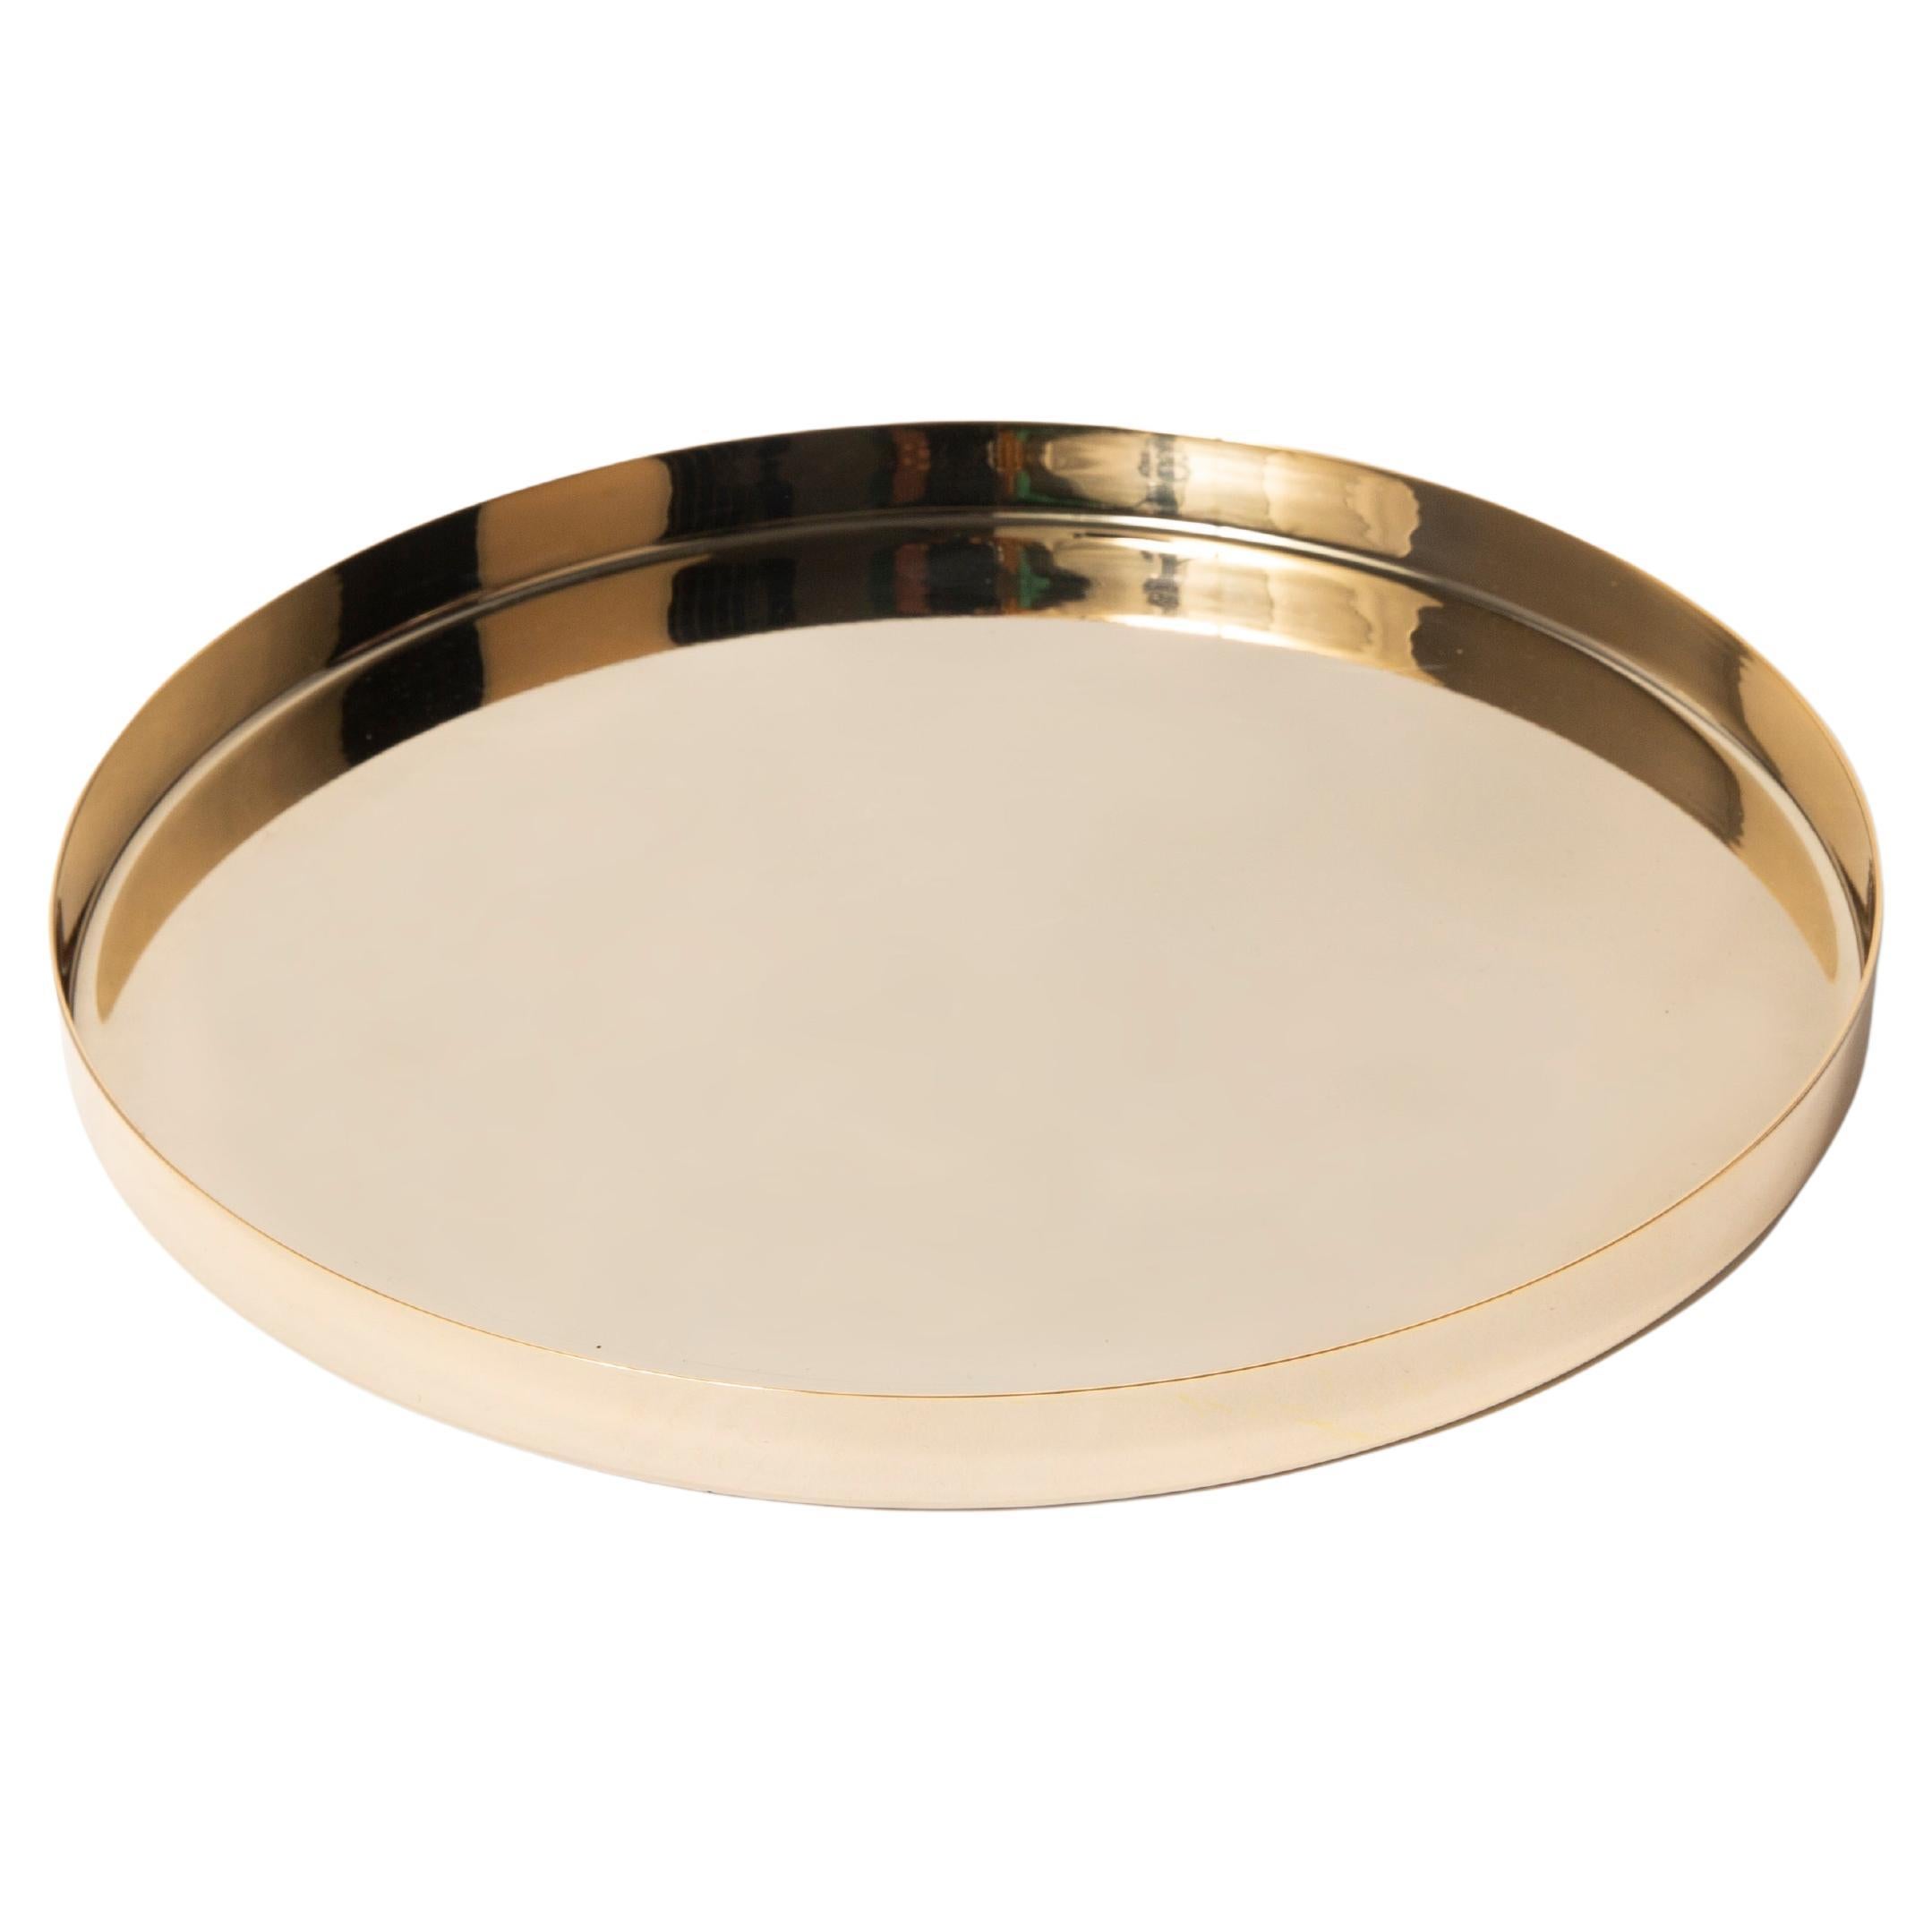 Small Round Gold Plated Decorative Tray made of Stainless Steel 